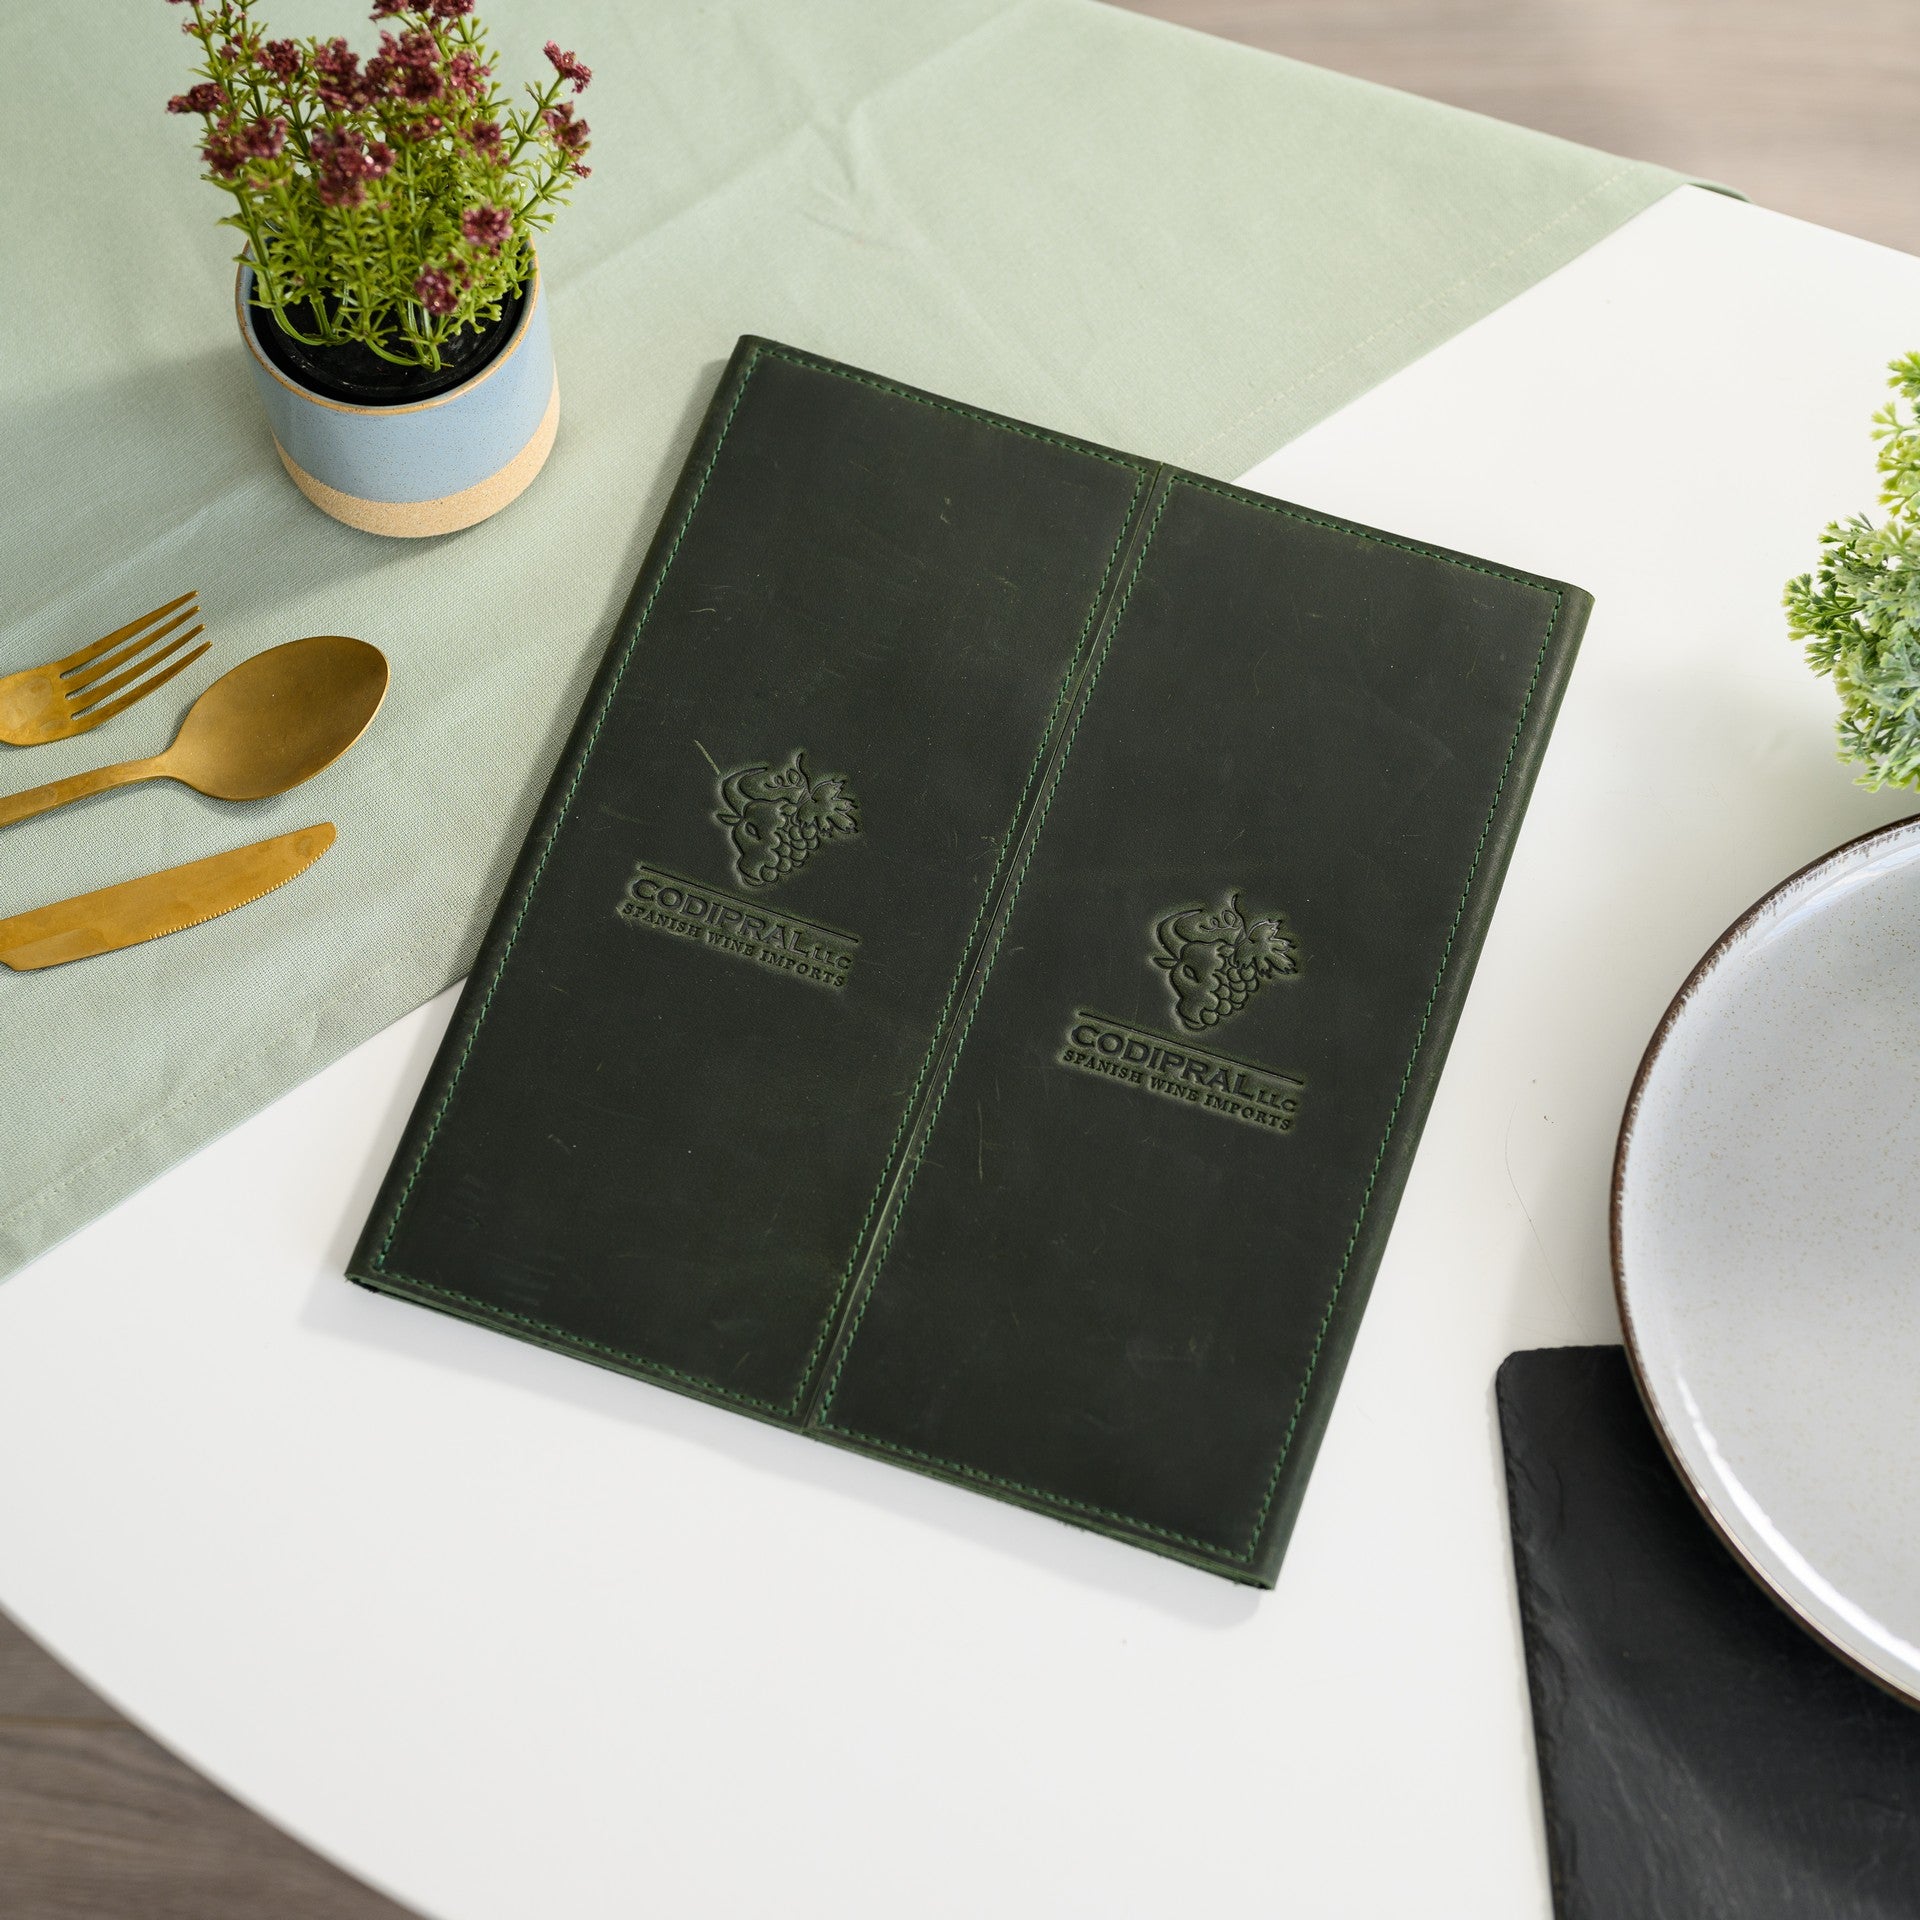 Stylish and practical solution for organizing your menu cards.